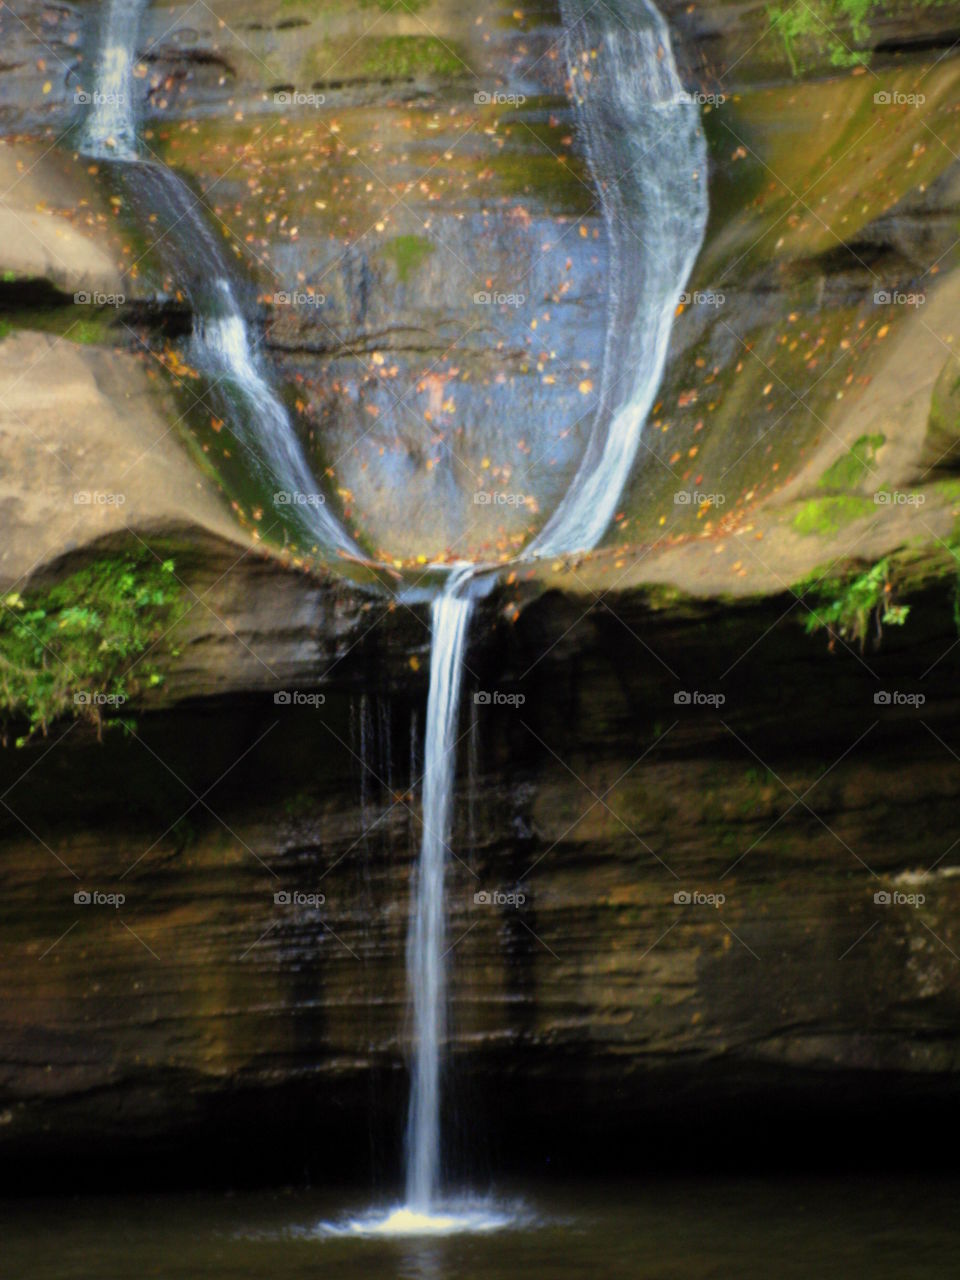 A very pretty waterfall at Hocking Hills State Park.